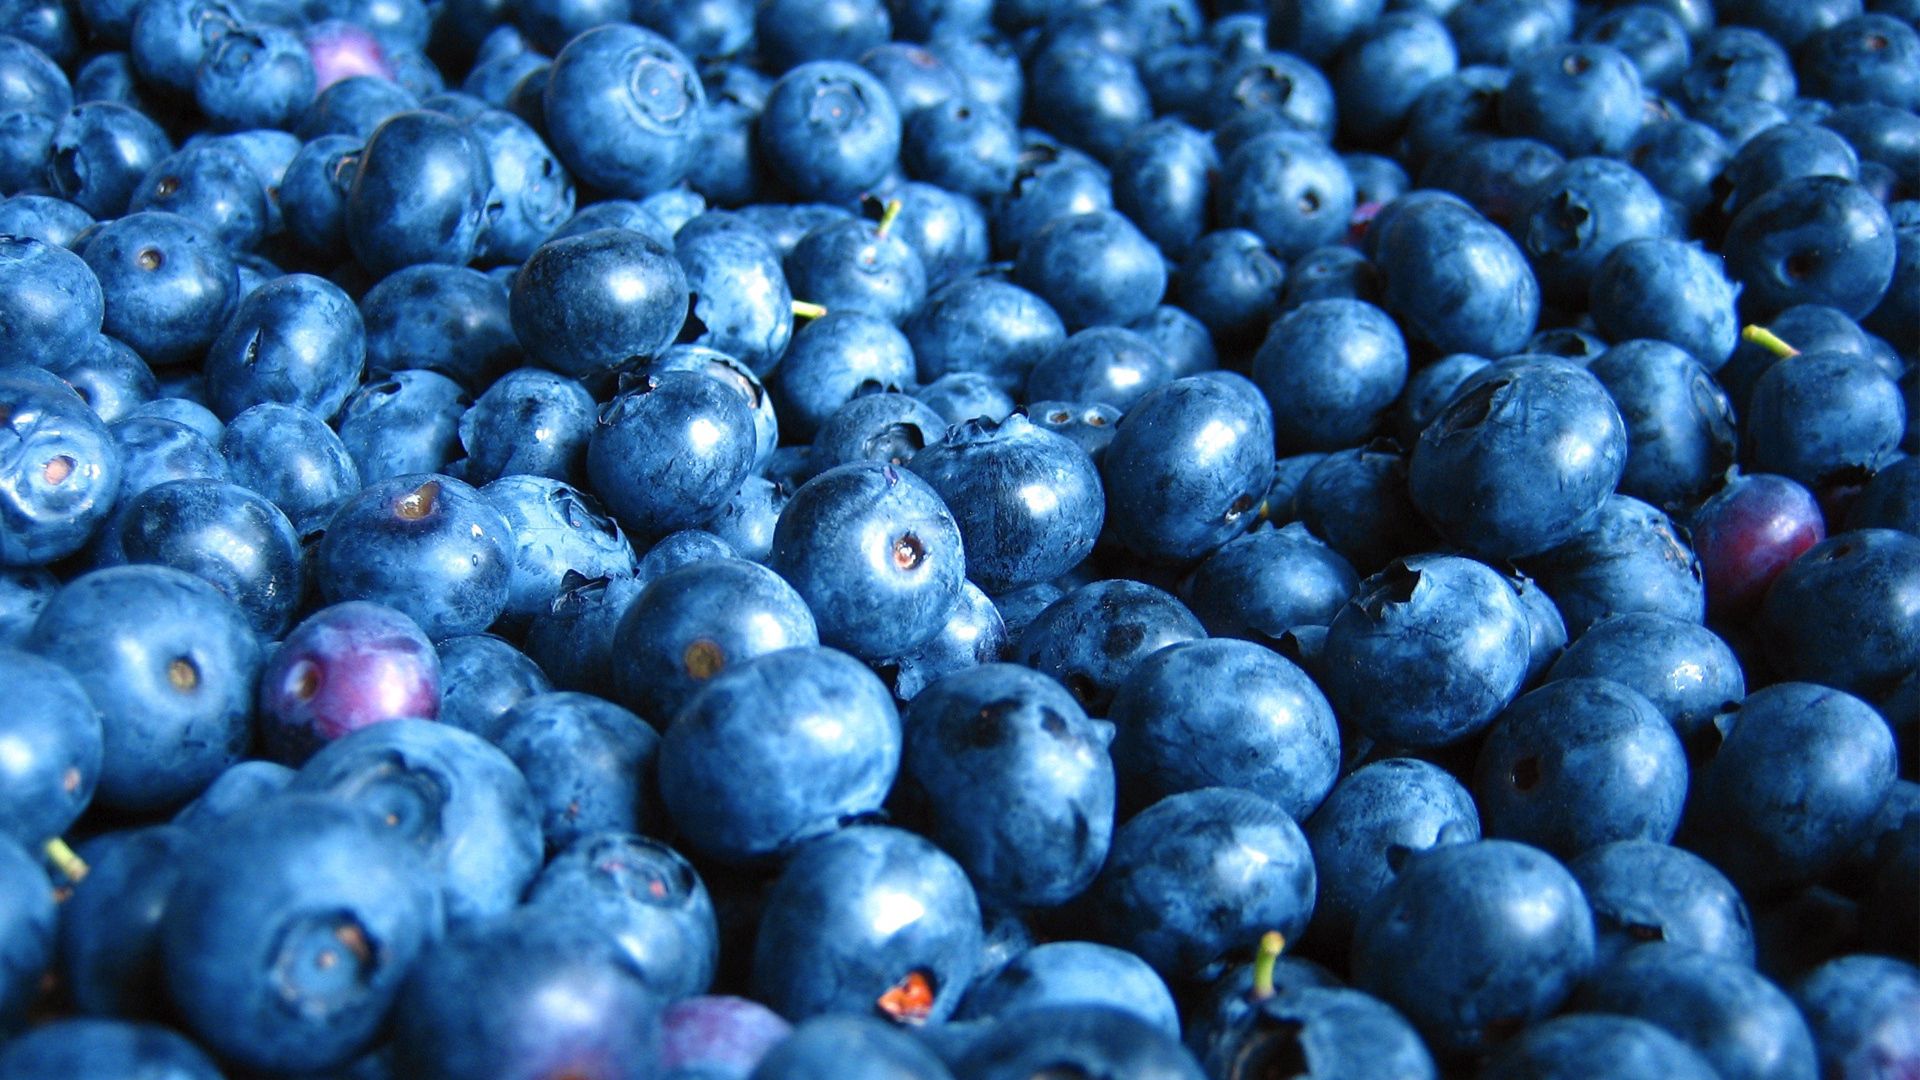 51638 download wallpaper food, bilberries, berry, lot screensavers and pictures for free